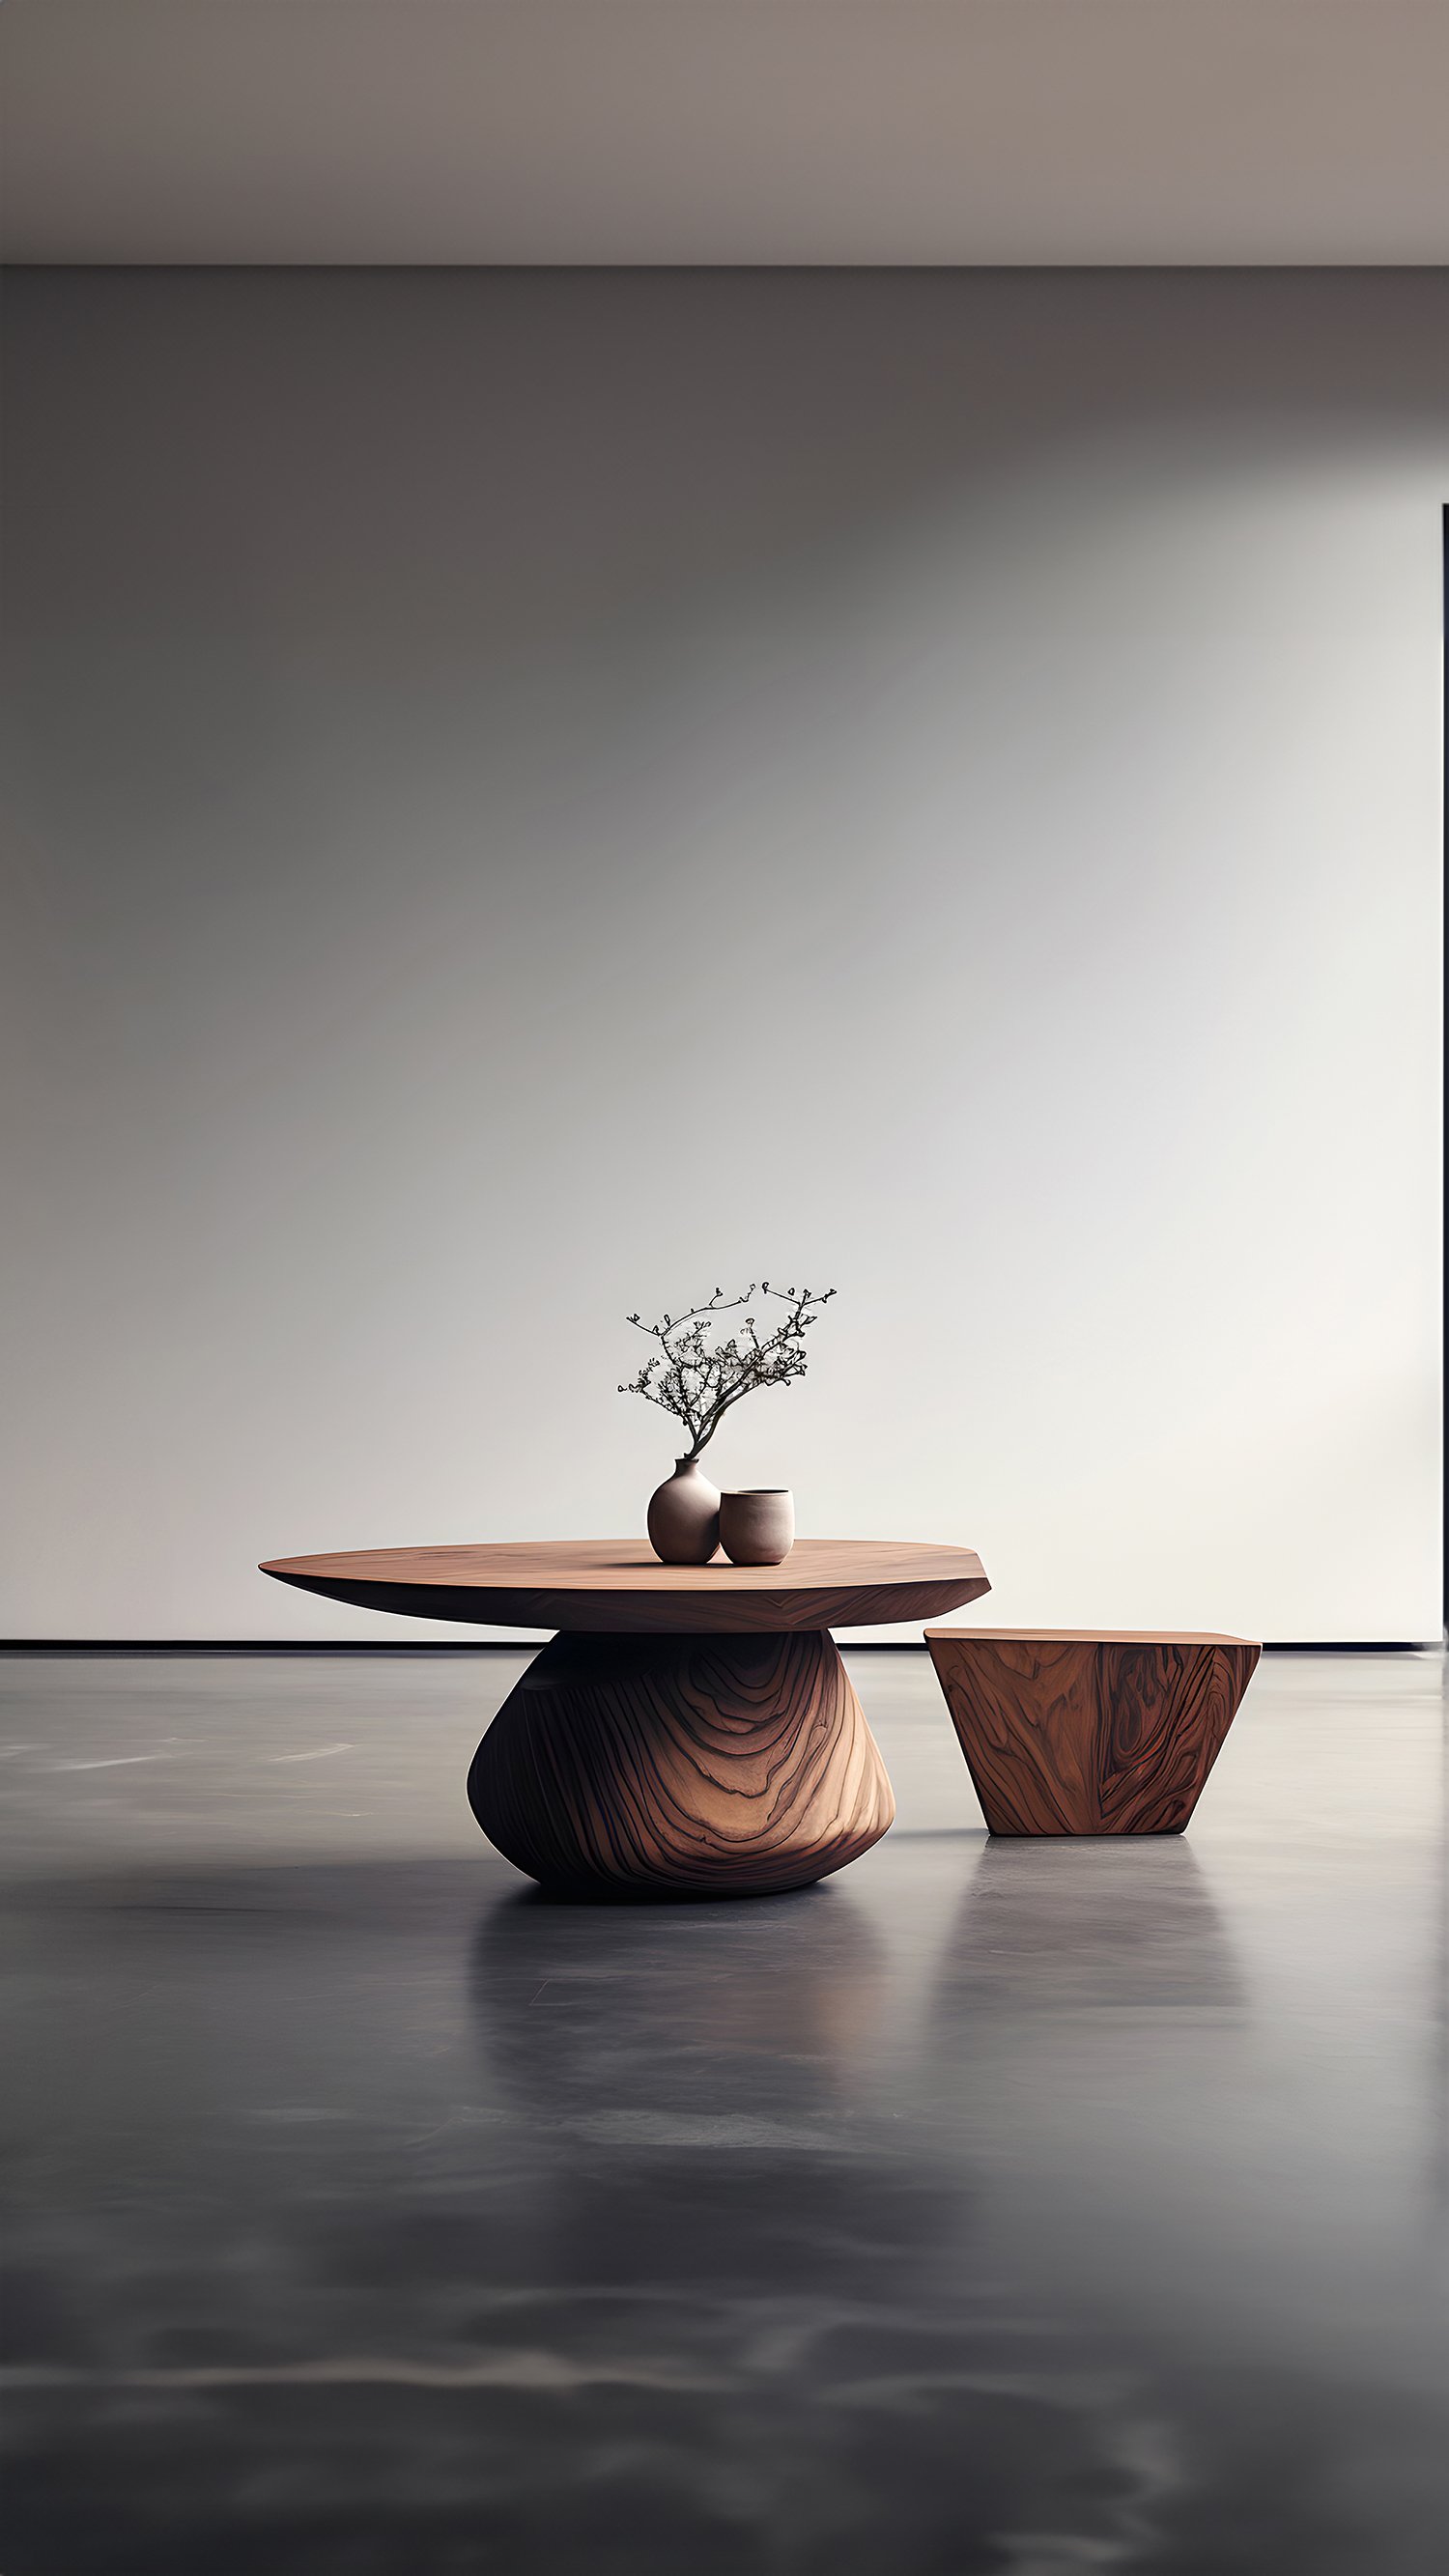 Sculptural Coffee Table Made of Solid Wood, Center Table Solace S33 by Joel Escalona — 7.jpg